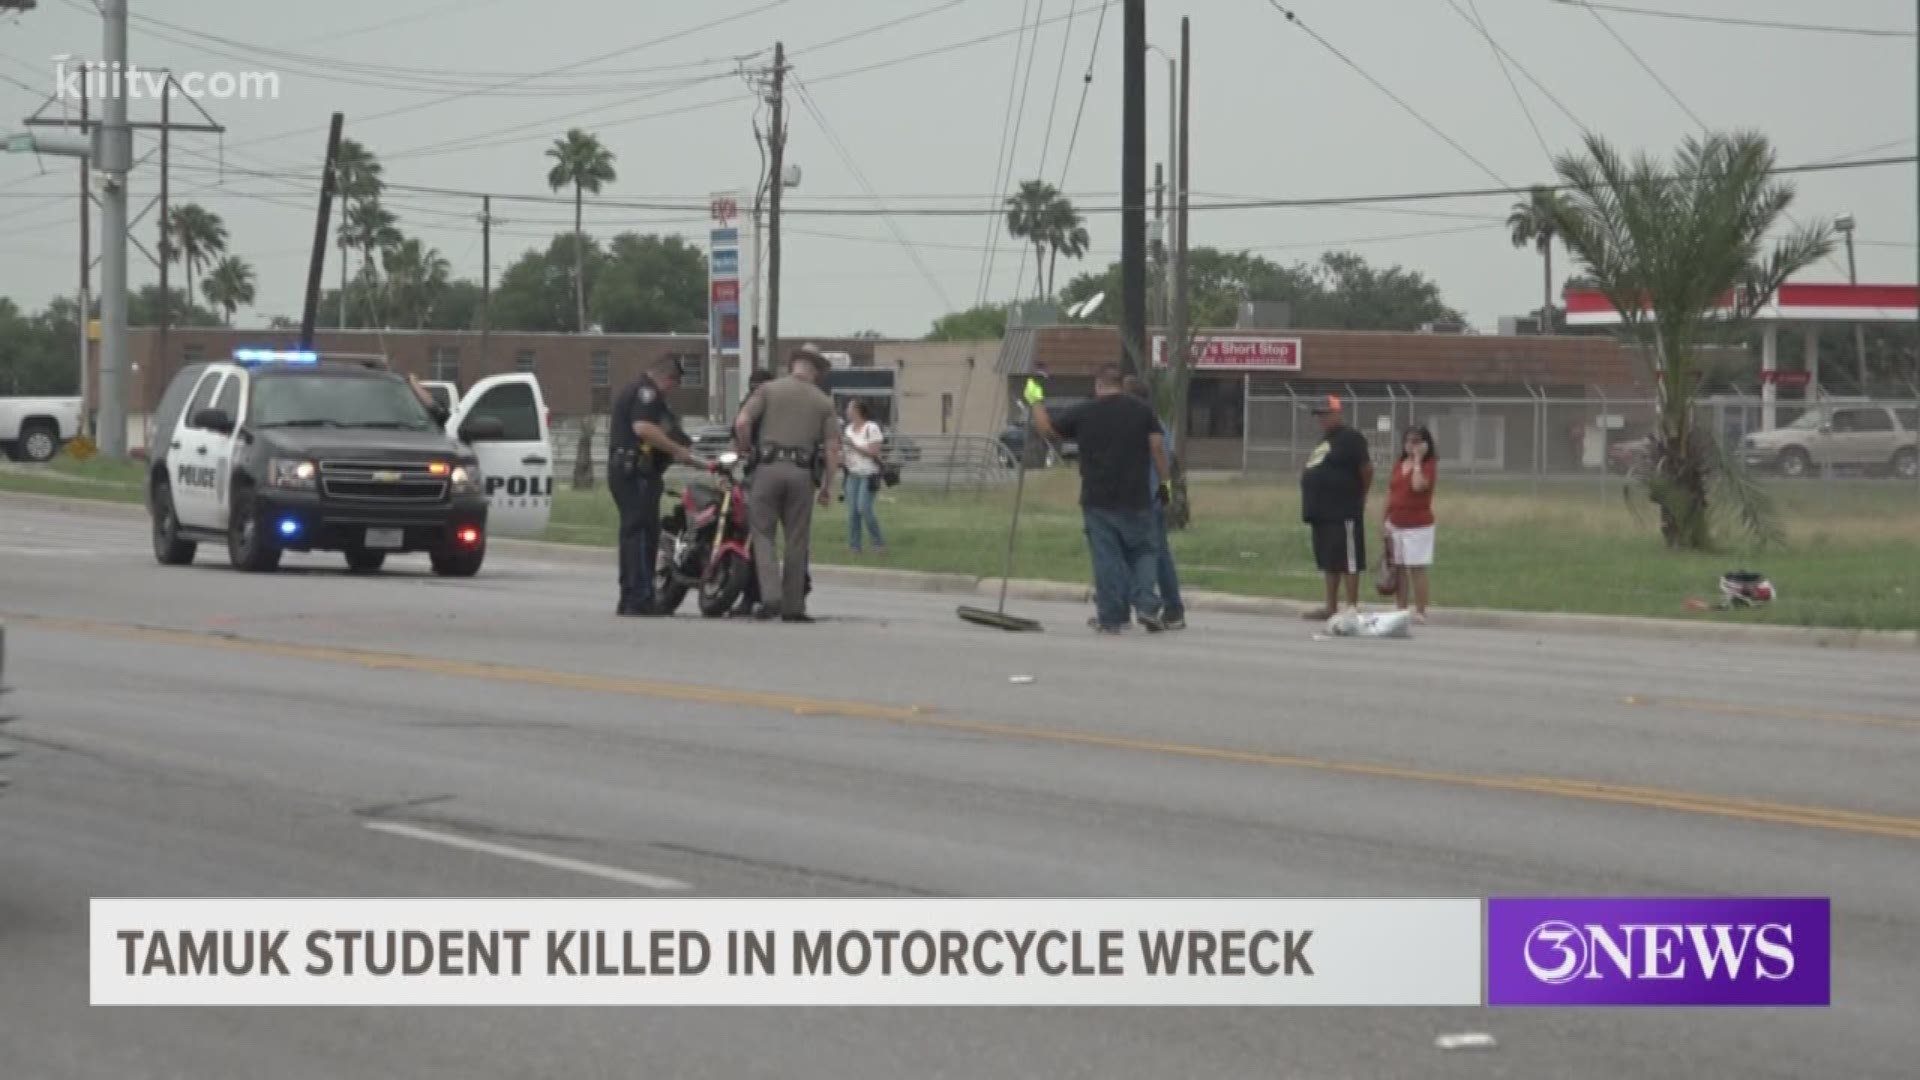 A 22-year-old female student from Texas A&M University-Kingsville died Wednesday as a result of a motorcycle accident in Kingsville.